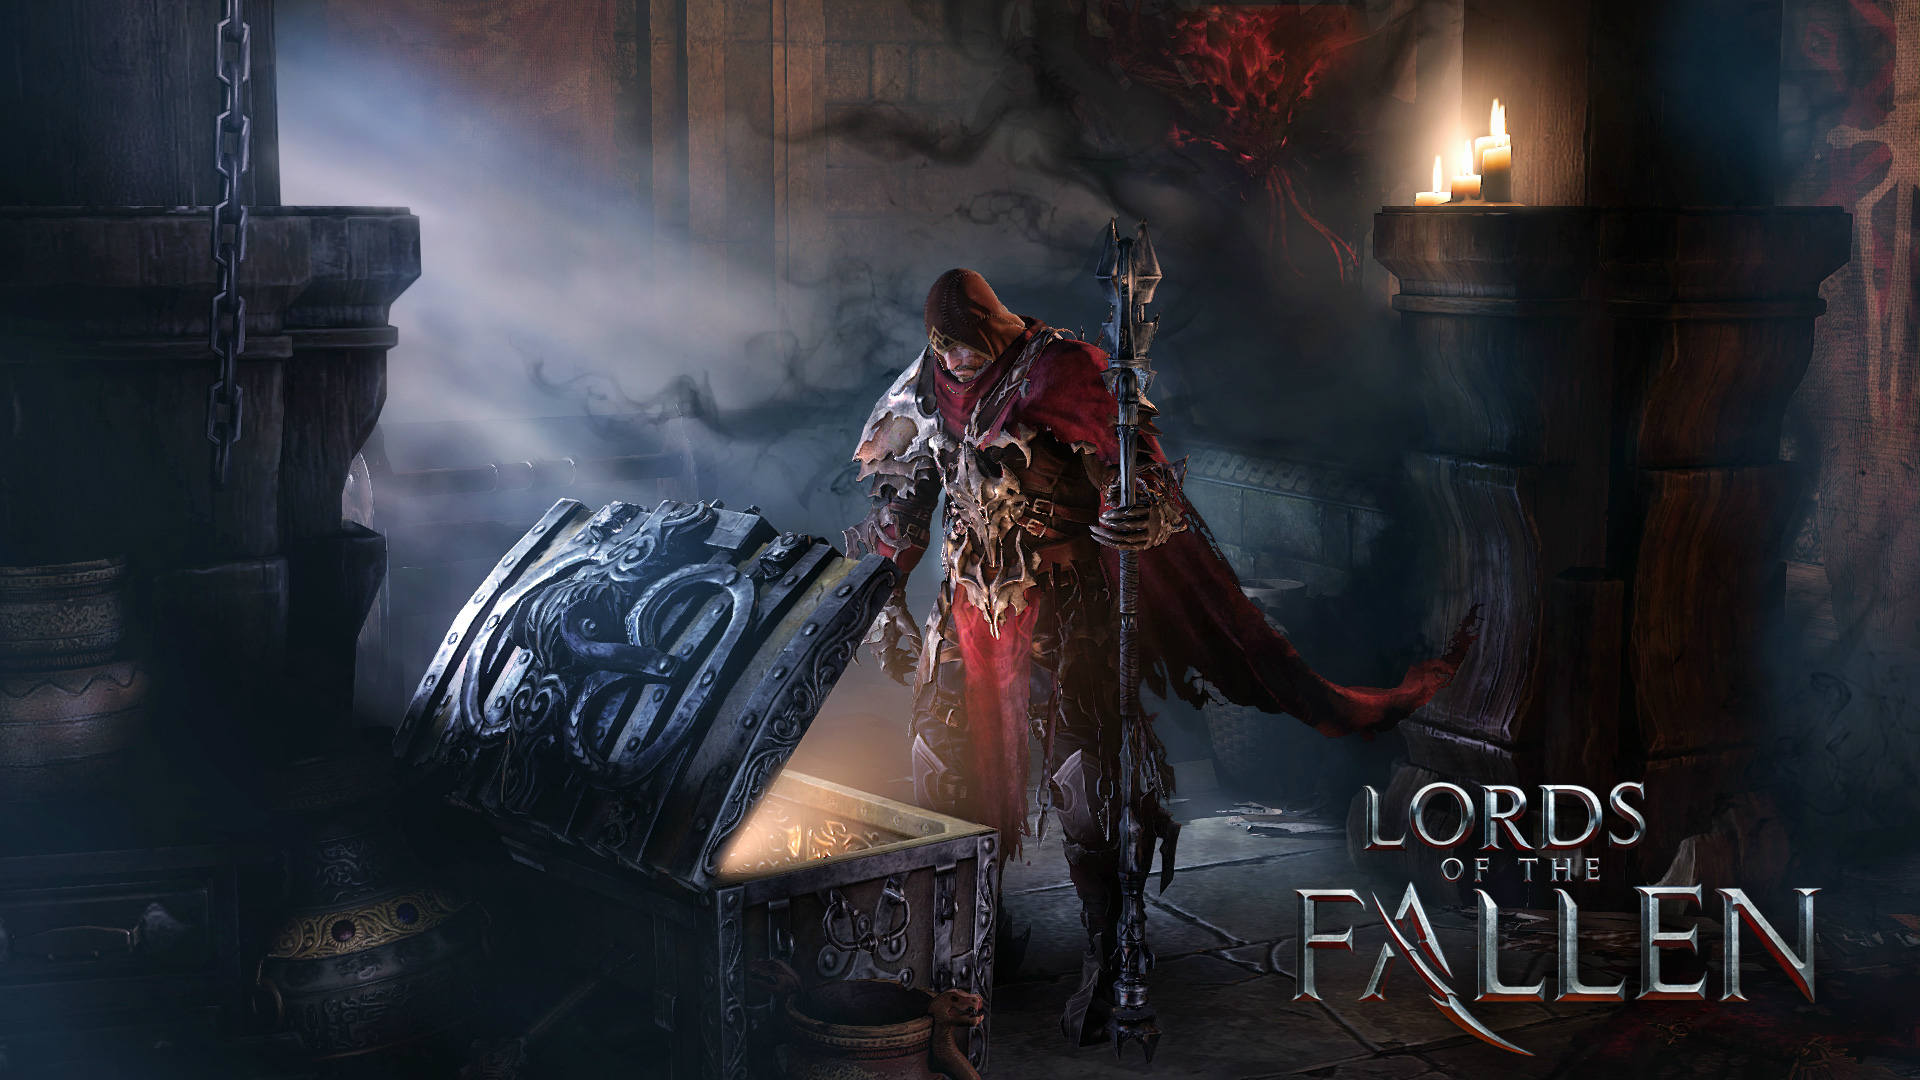 Wallpaper Lords of the Fallen Rebel Gaming